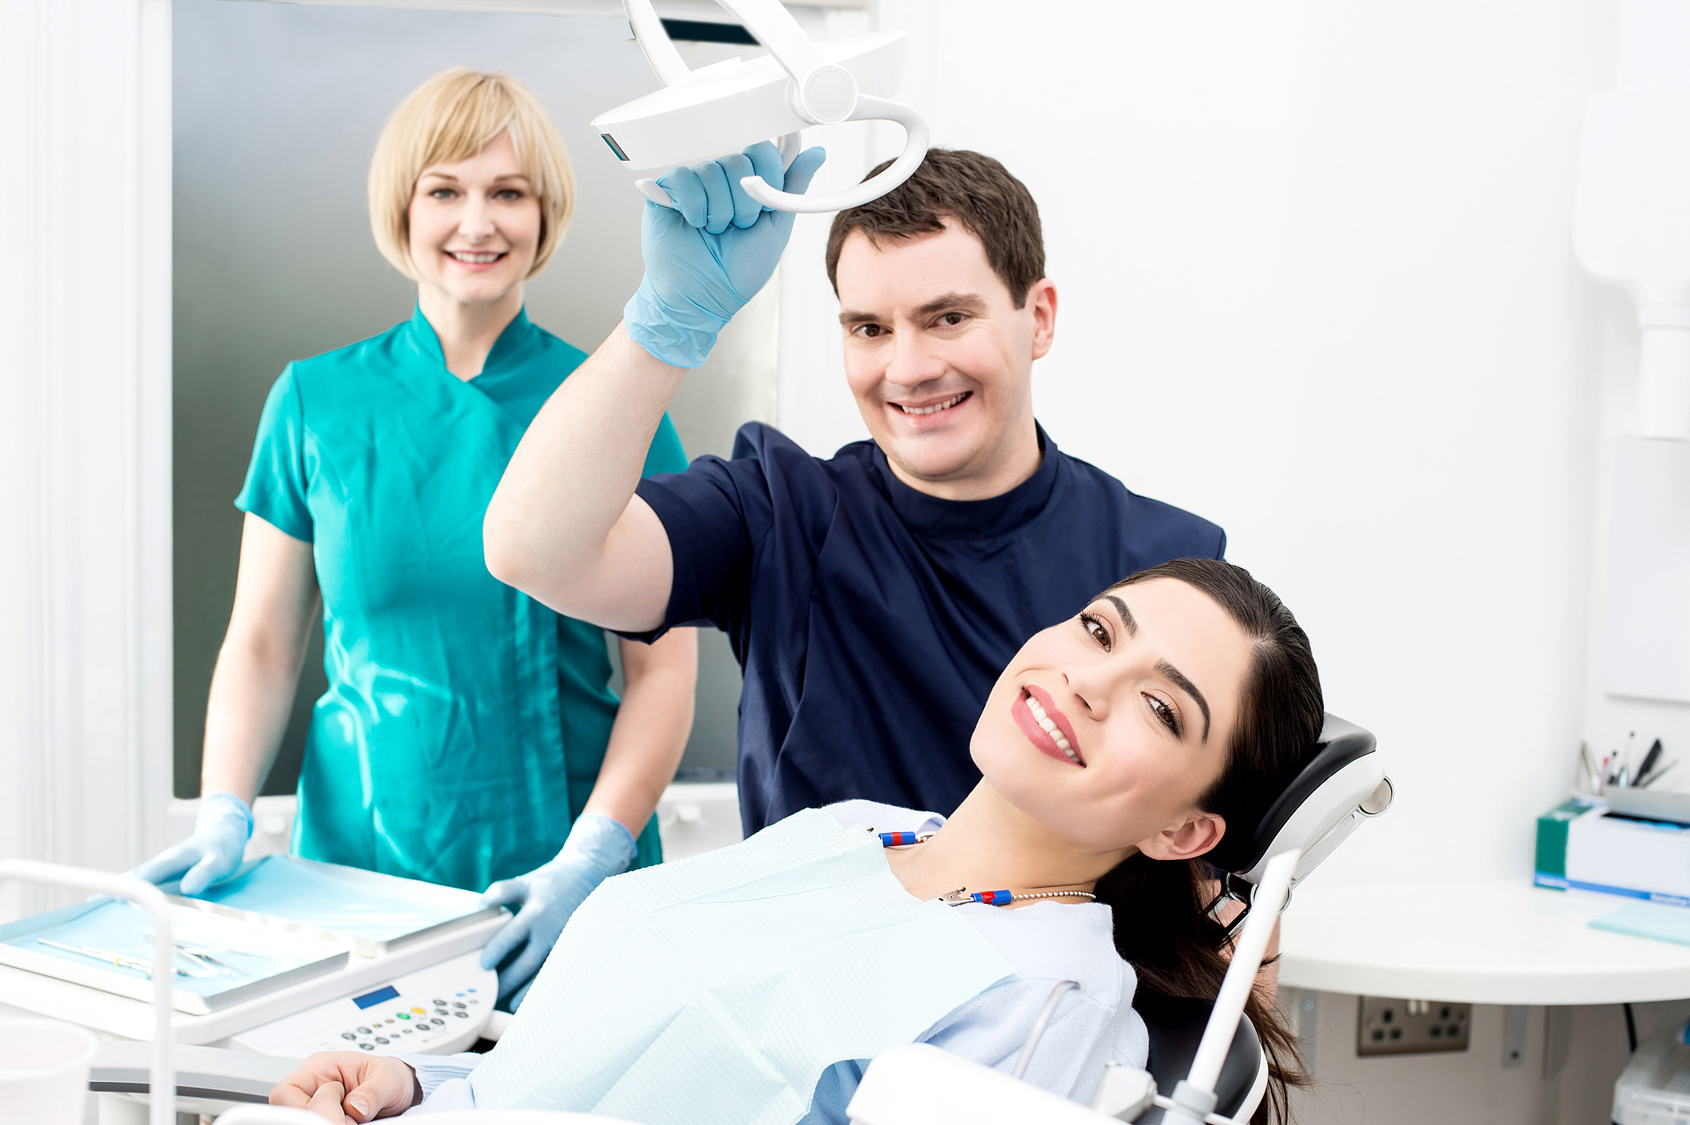 Smiling dentist and assistant with female patient